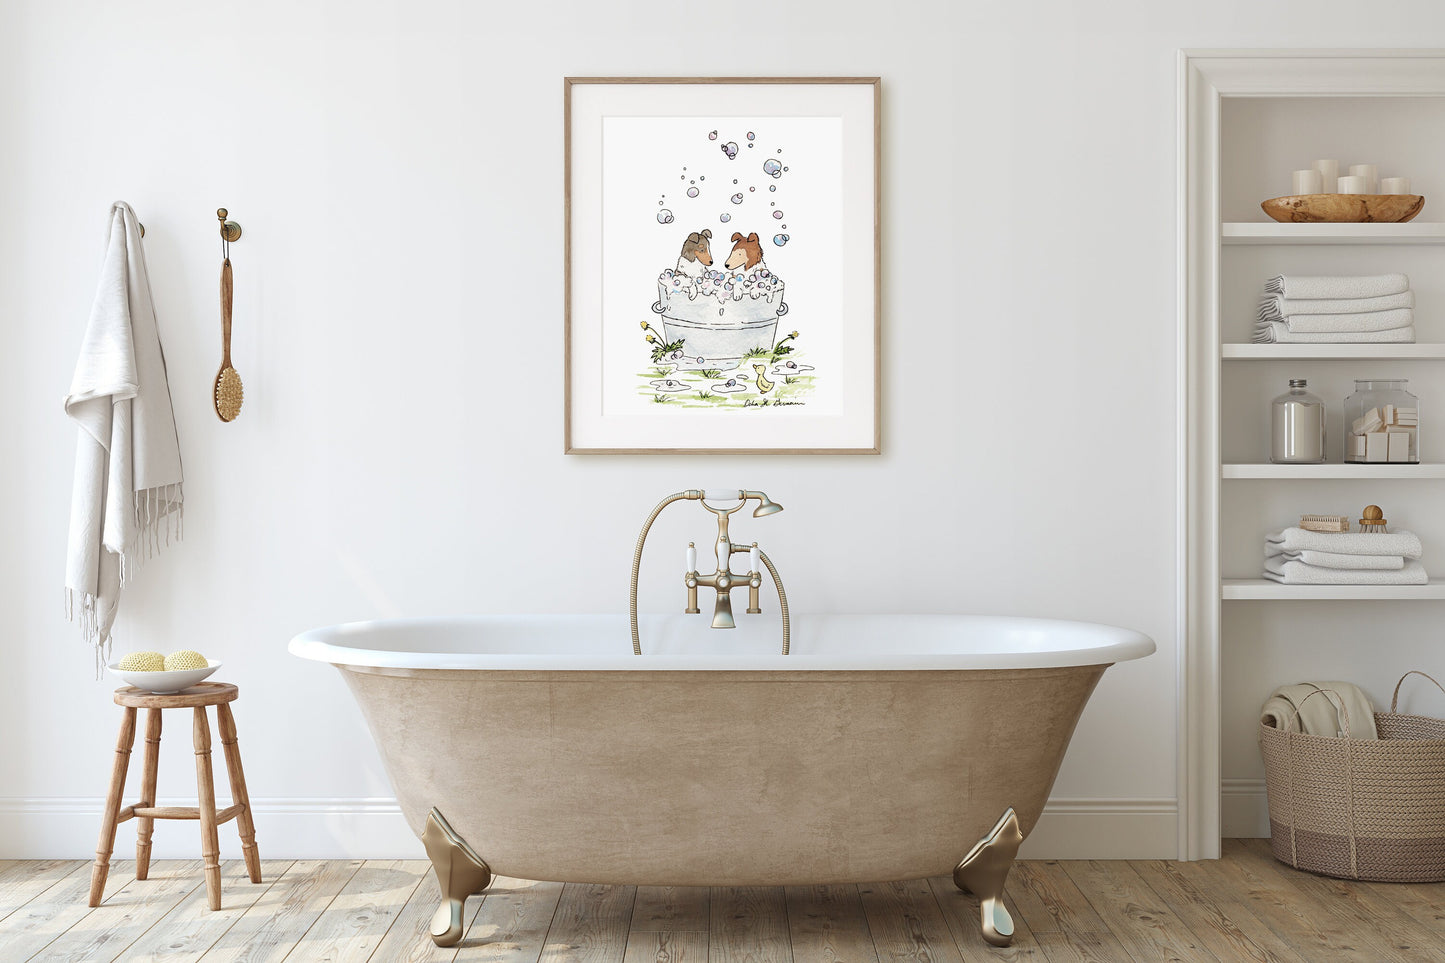 Collie Wall Art, Watercolor Collie Print, Collies in a Bathtub, Art for Dog Lovers